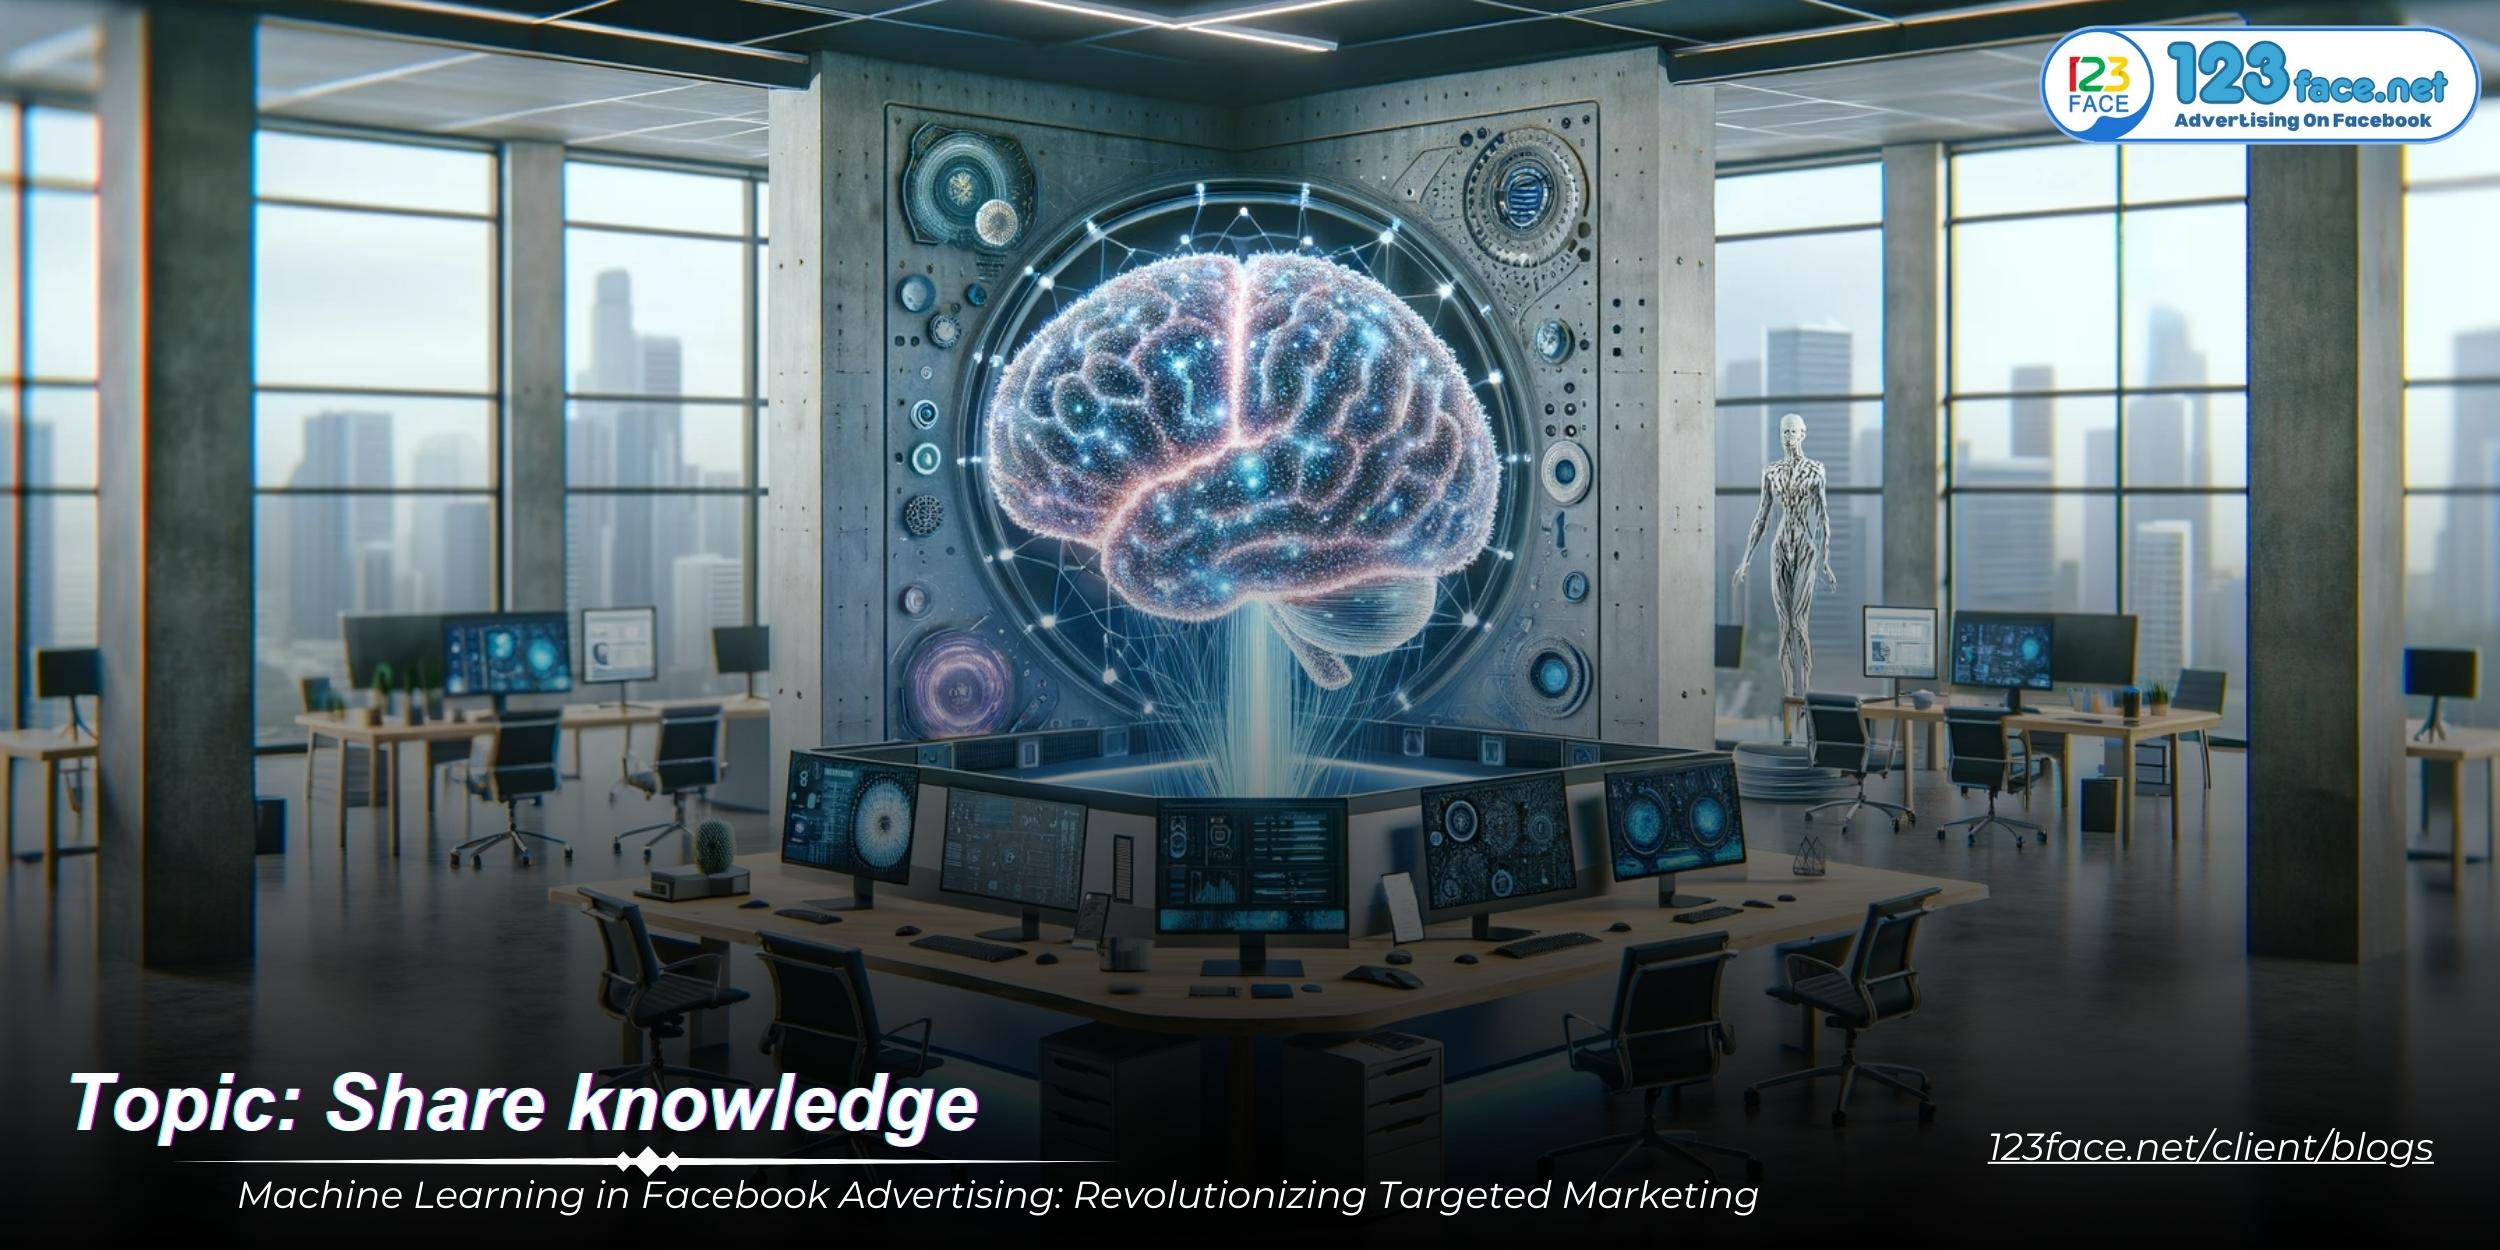 Machine Learning in Facebook Advertising: Revolutionizing Targeted Marketing